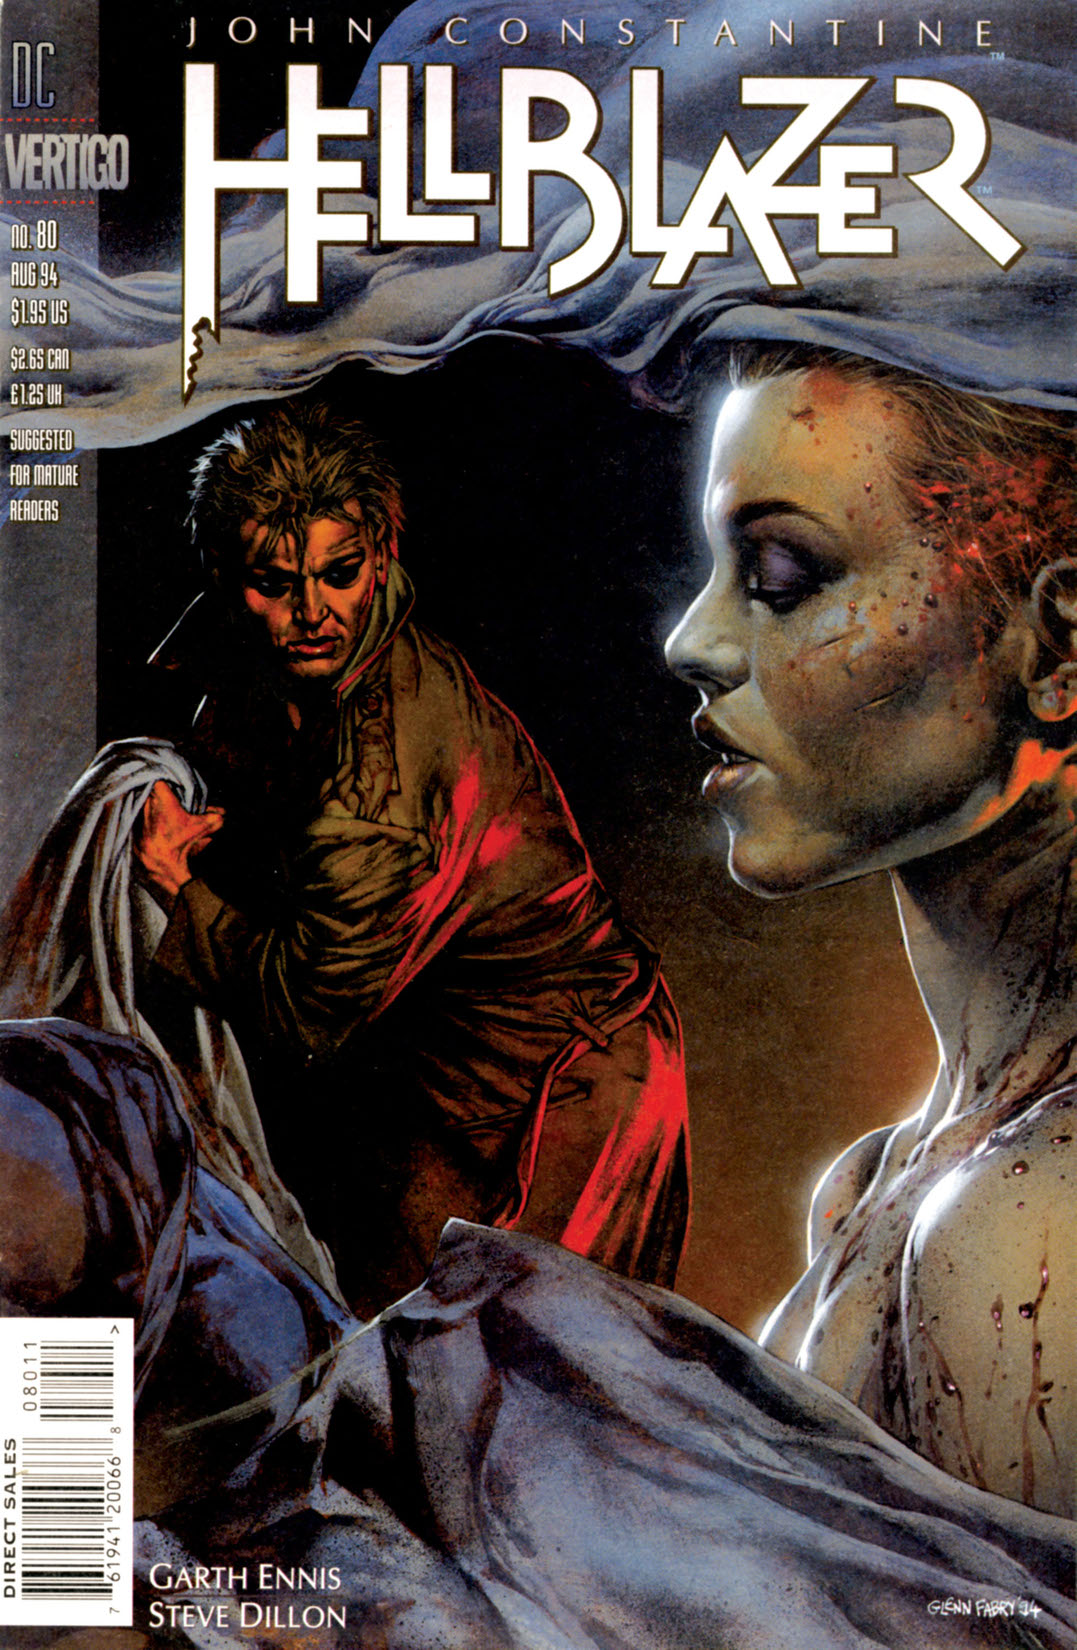 Hellblazer #80 preview images